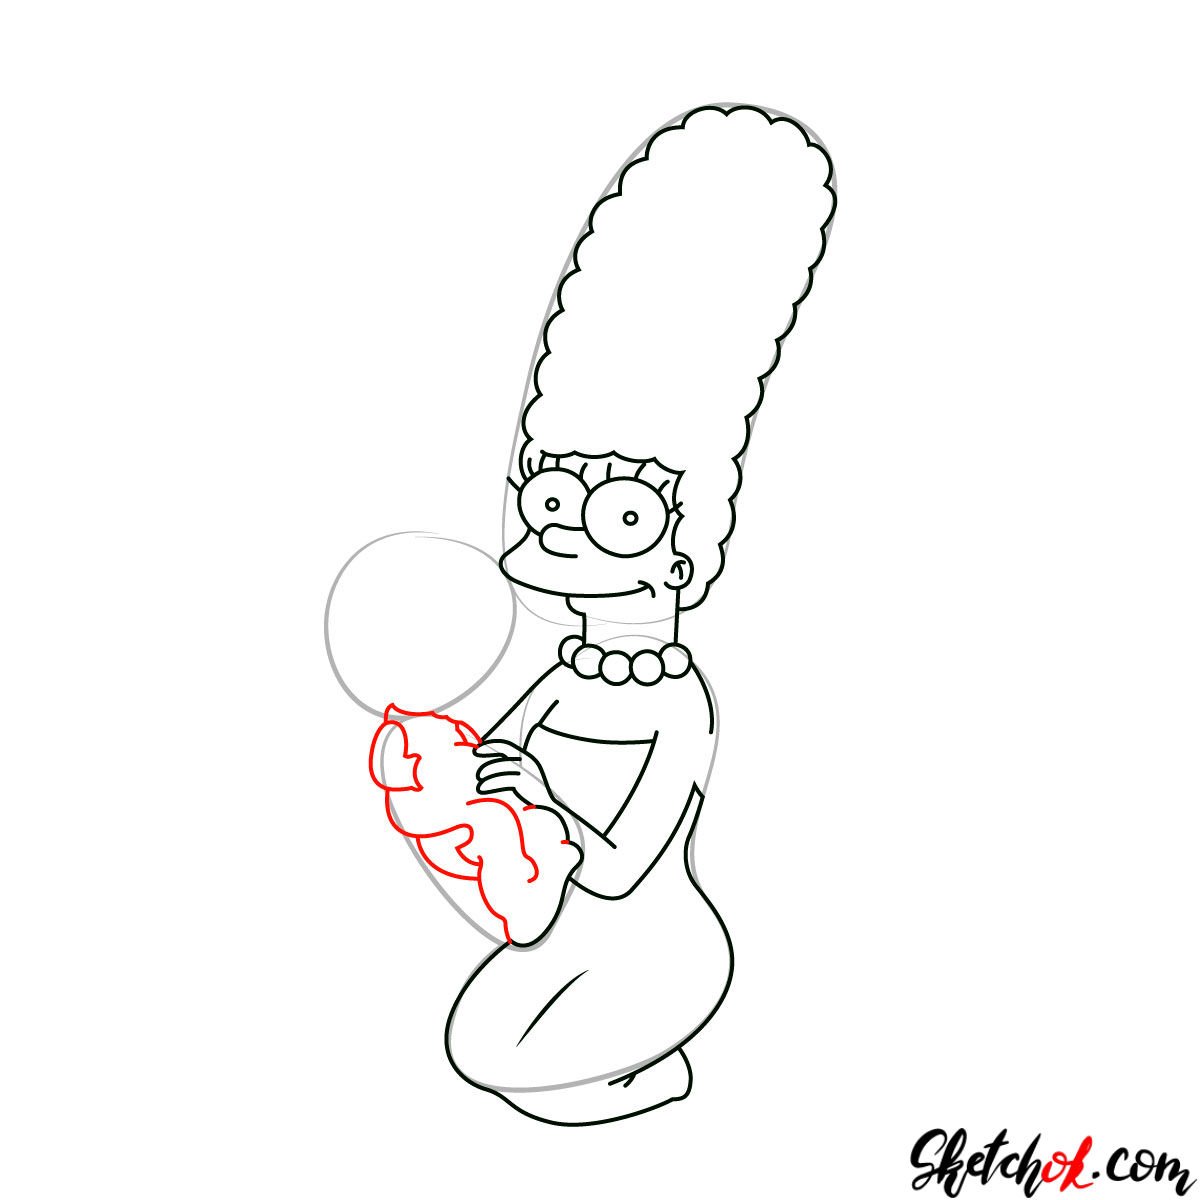 How to draw the Simpsons Family - step 07